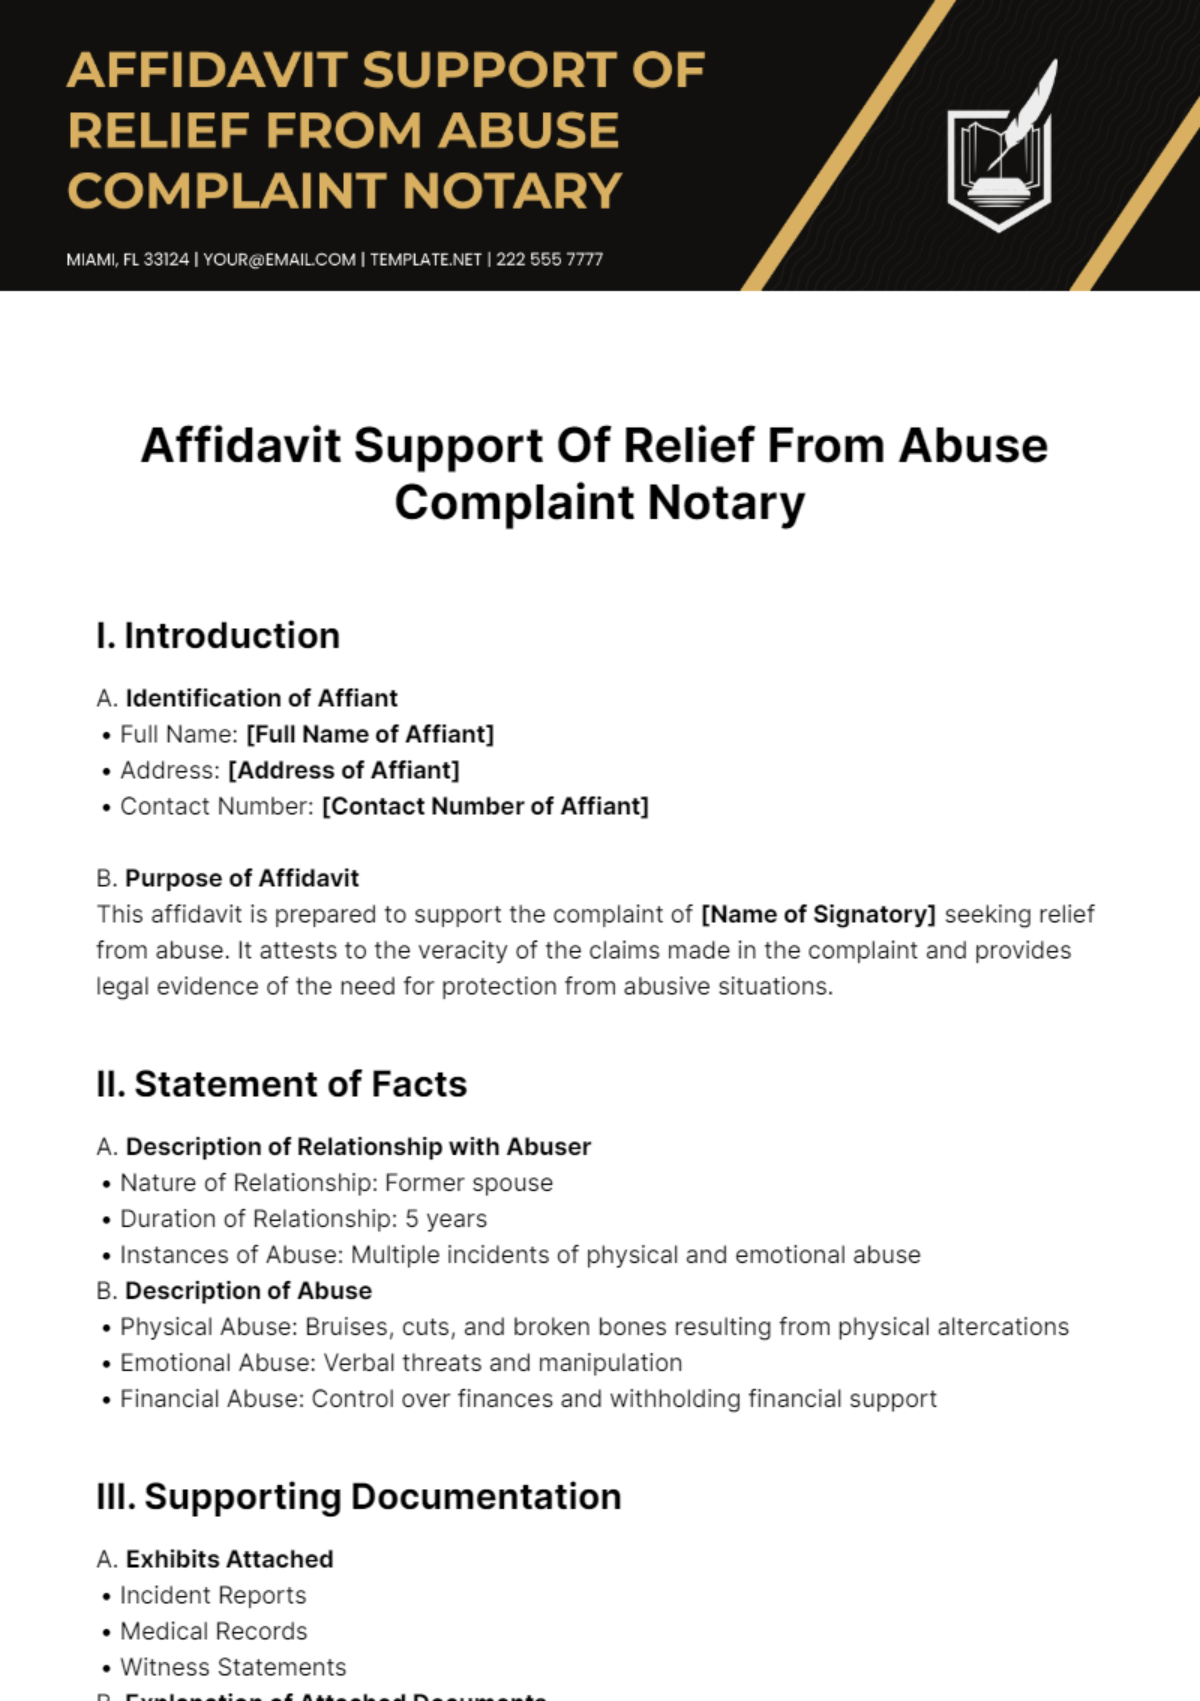 Affidavit Support Of Relief From Abuse Complaint Notary Template